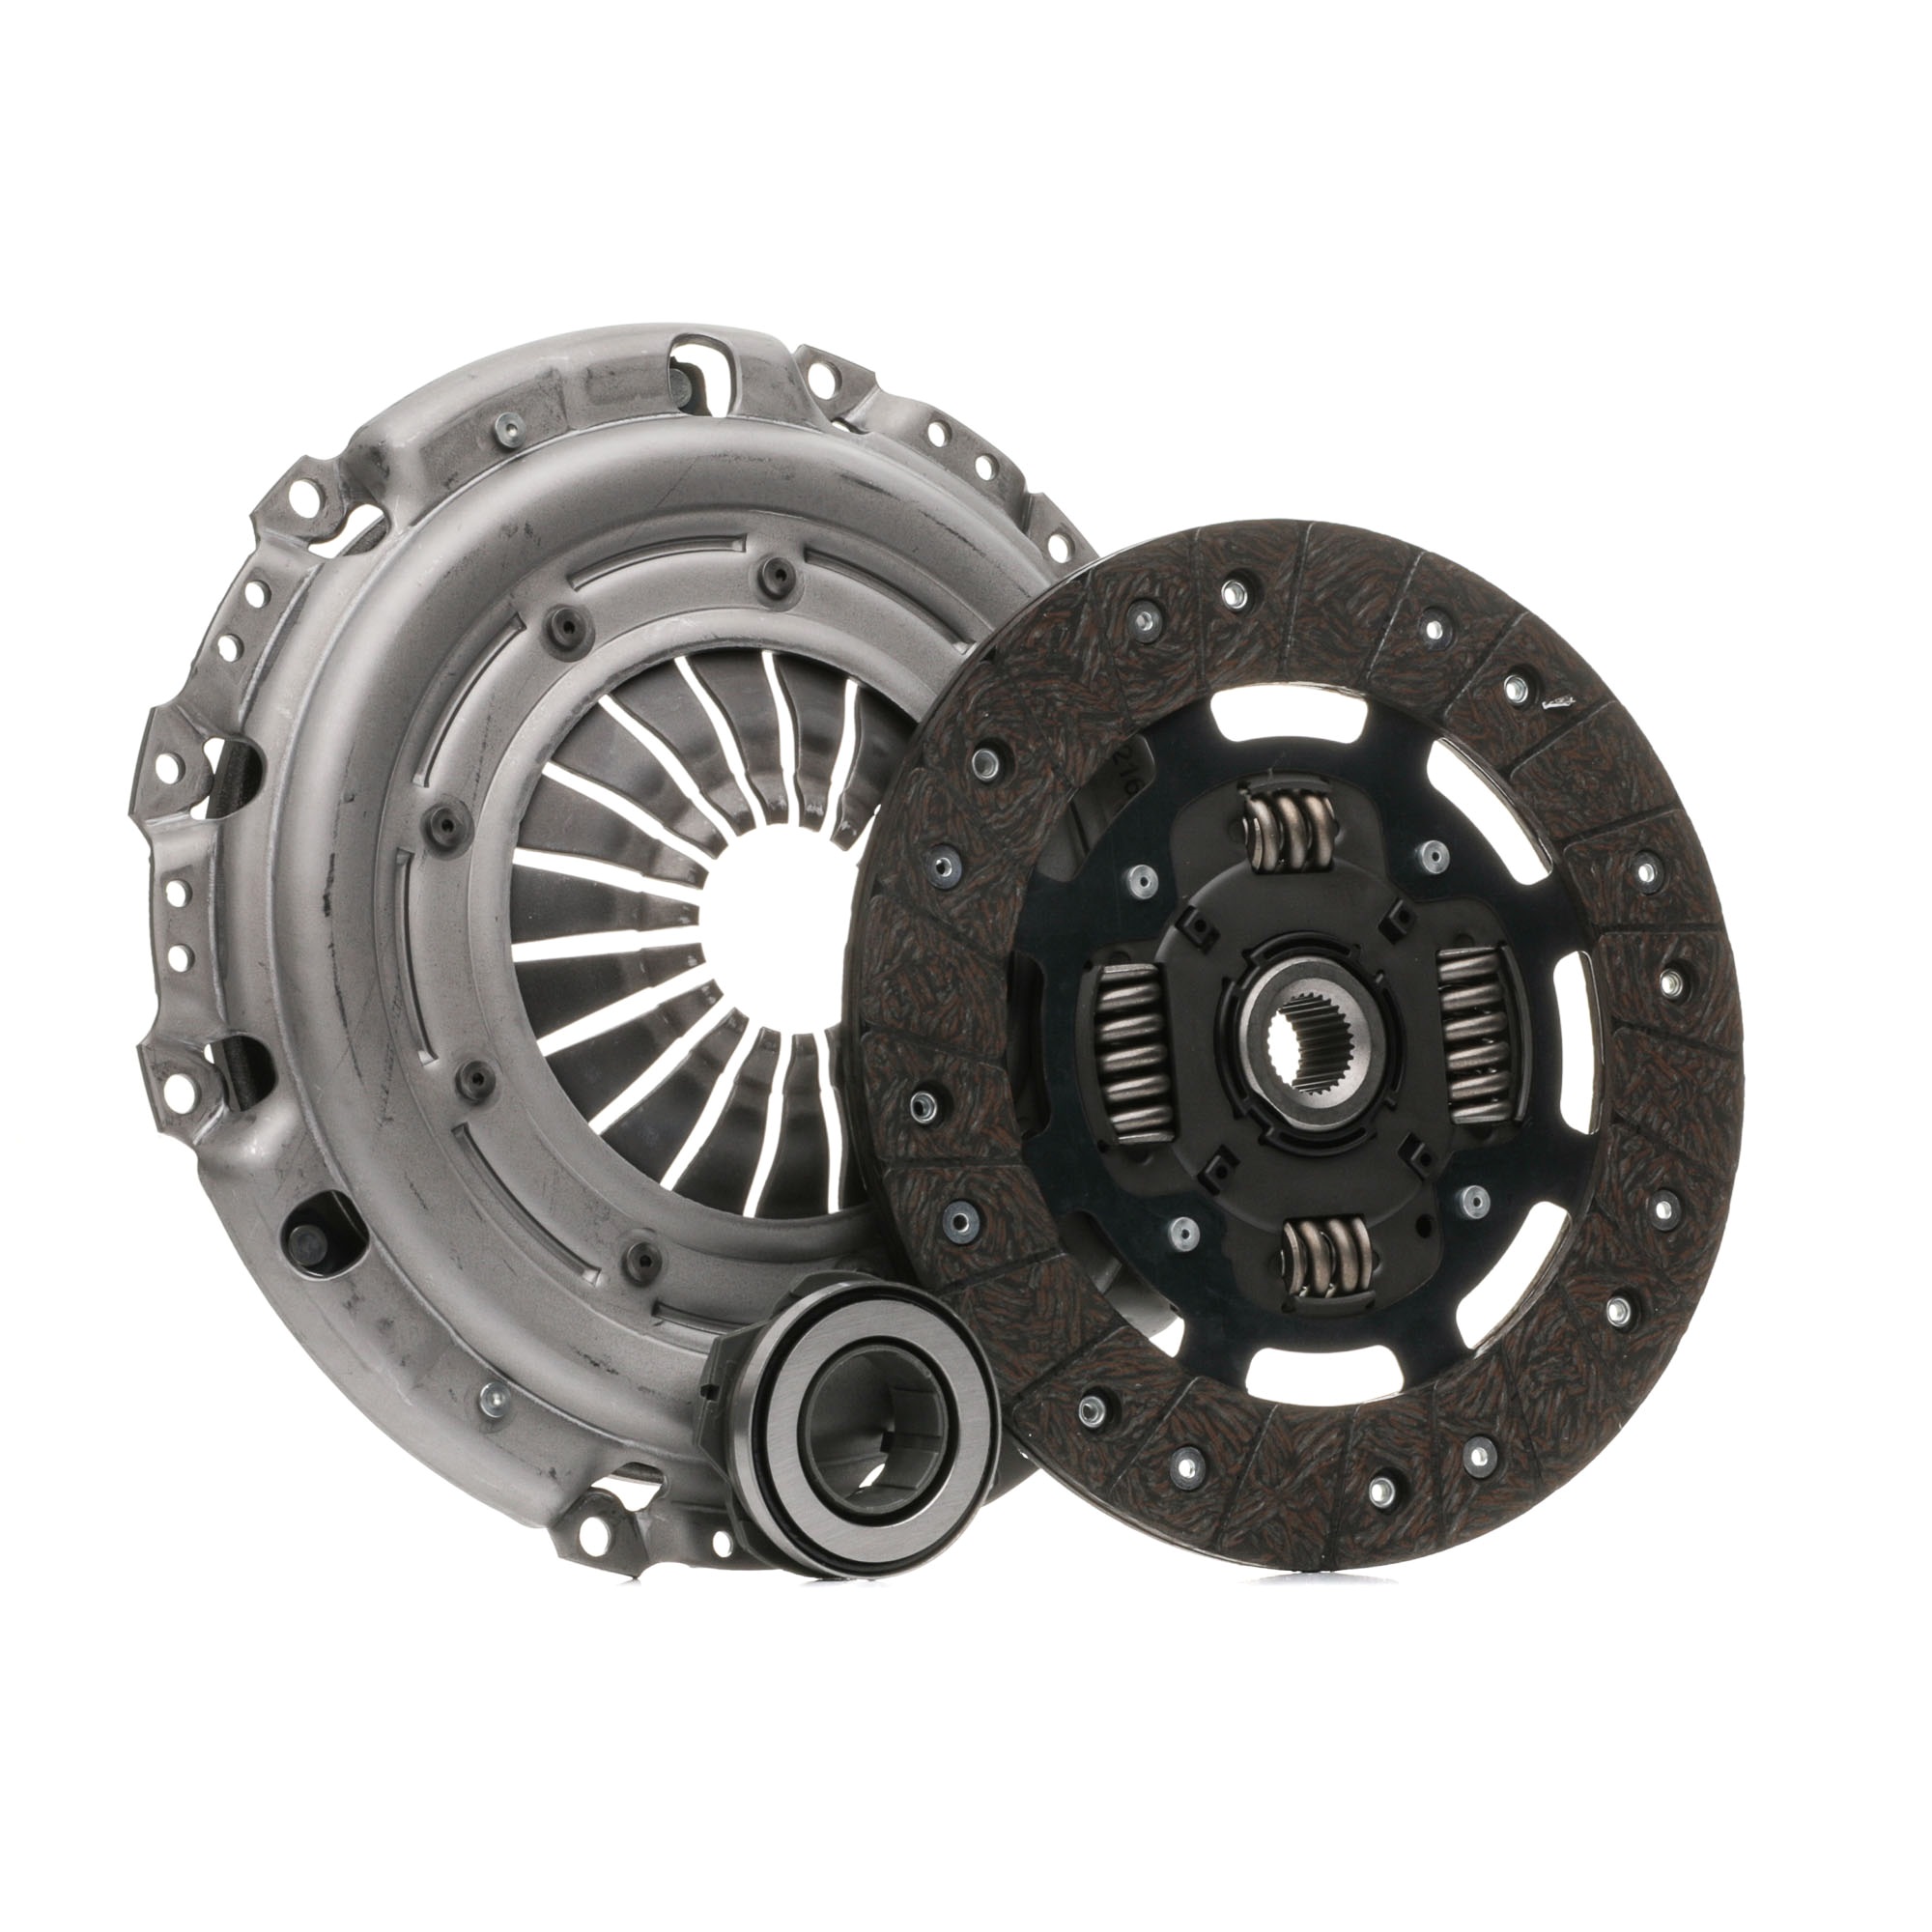 STARK SKCK-0100316 Clutch kit three-piece, with synthetic grease, with clutch release bearing, 229mm